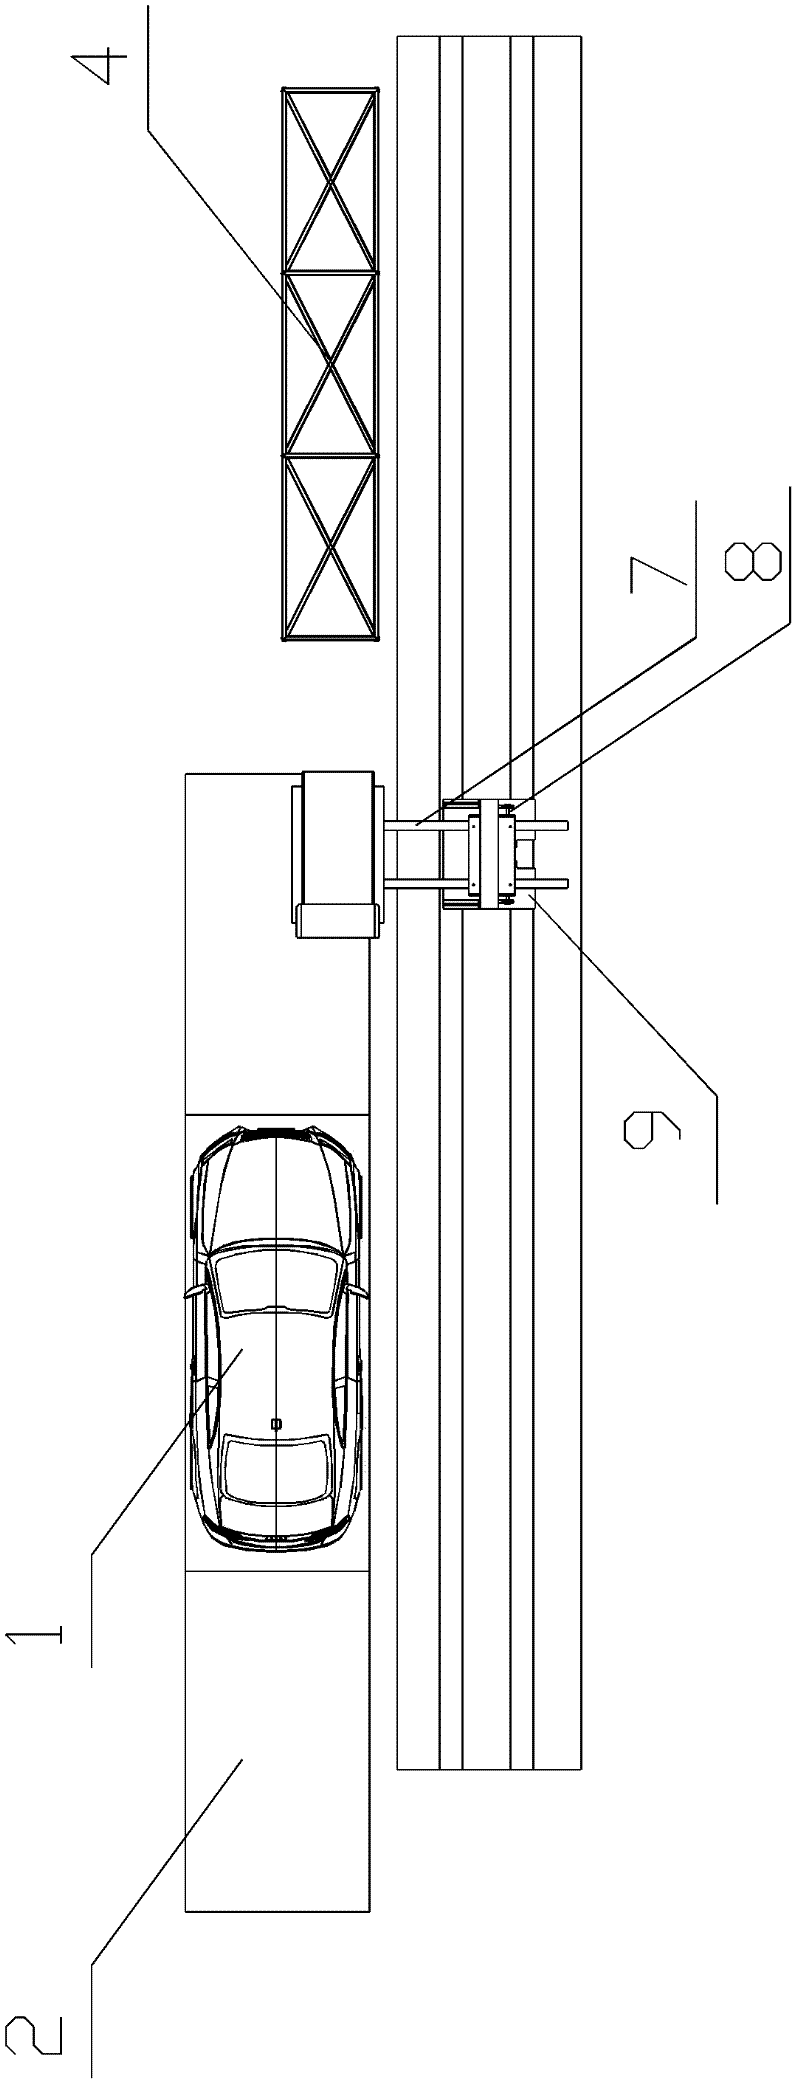 System for quickly changing chassis battery for electric passenger vehicle based on cartesian robot